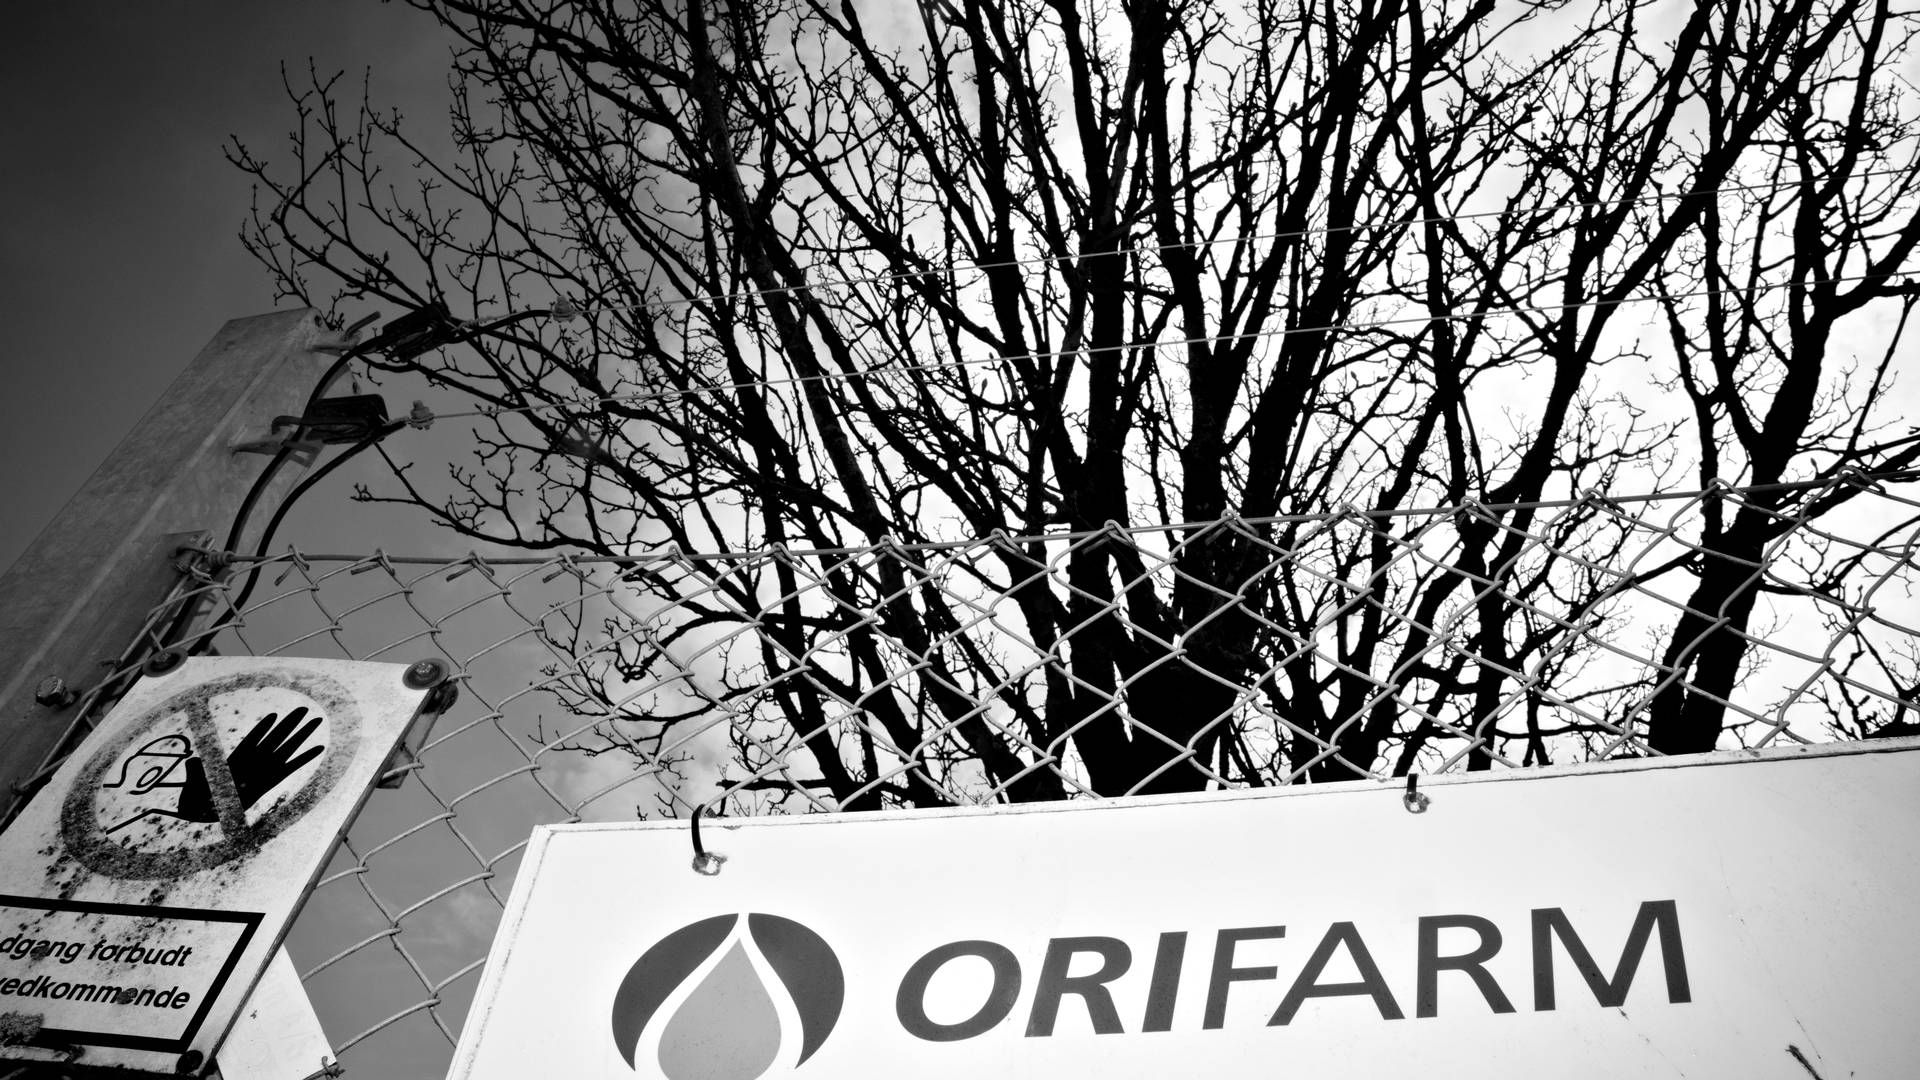 Orifarm sells counterfeit and parallel imported medicines. | Photo: Marius Renner